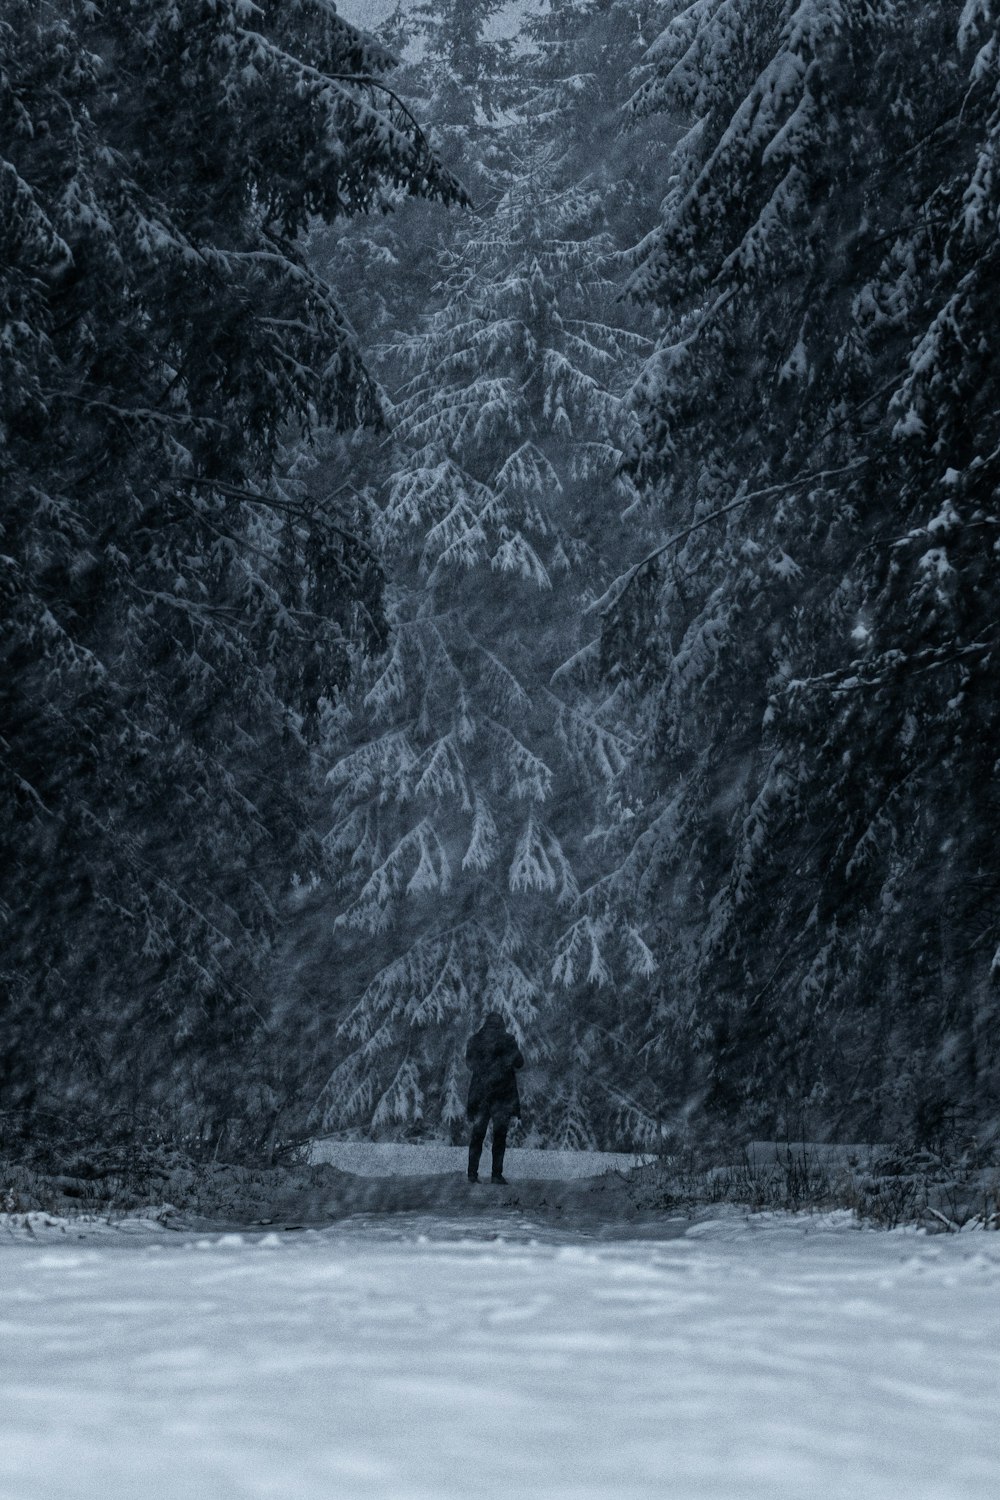 a person standing in the middle of a snowy forest